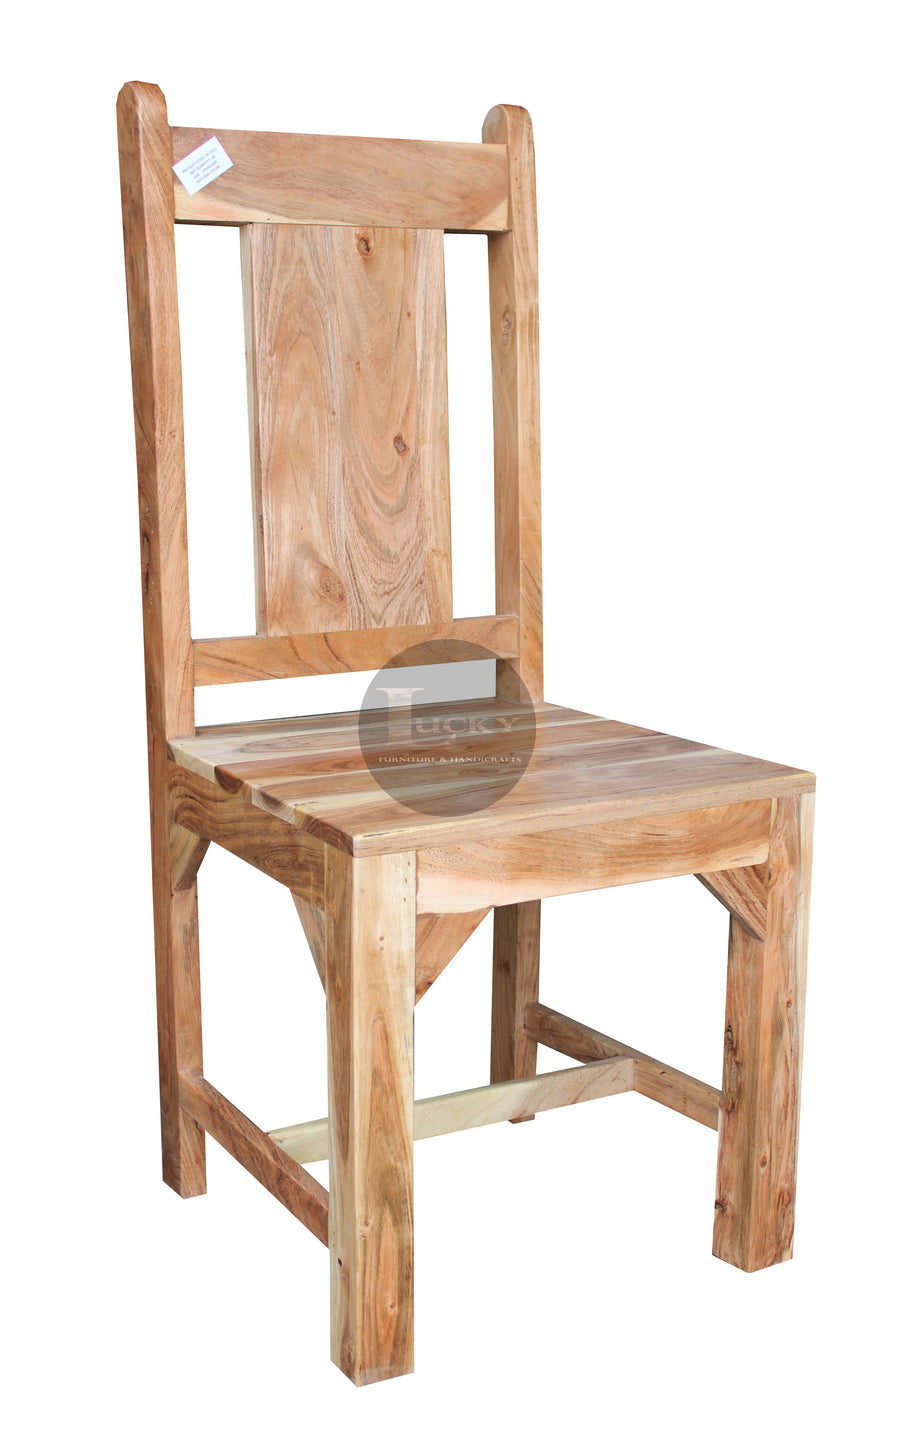 Acacia wood classic wooden chair.